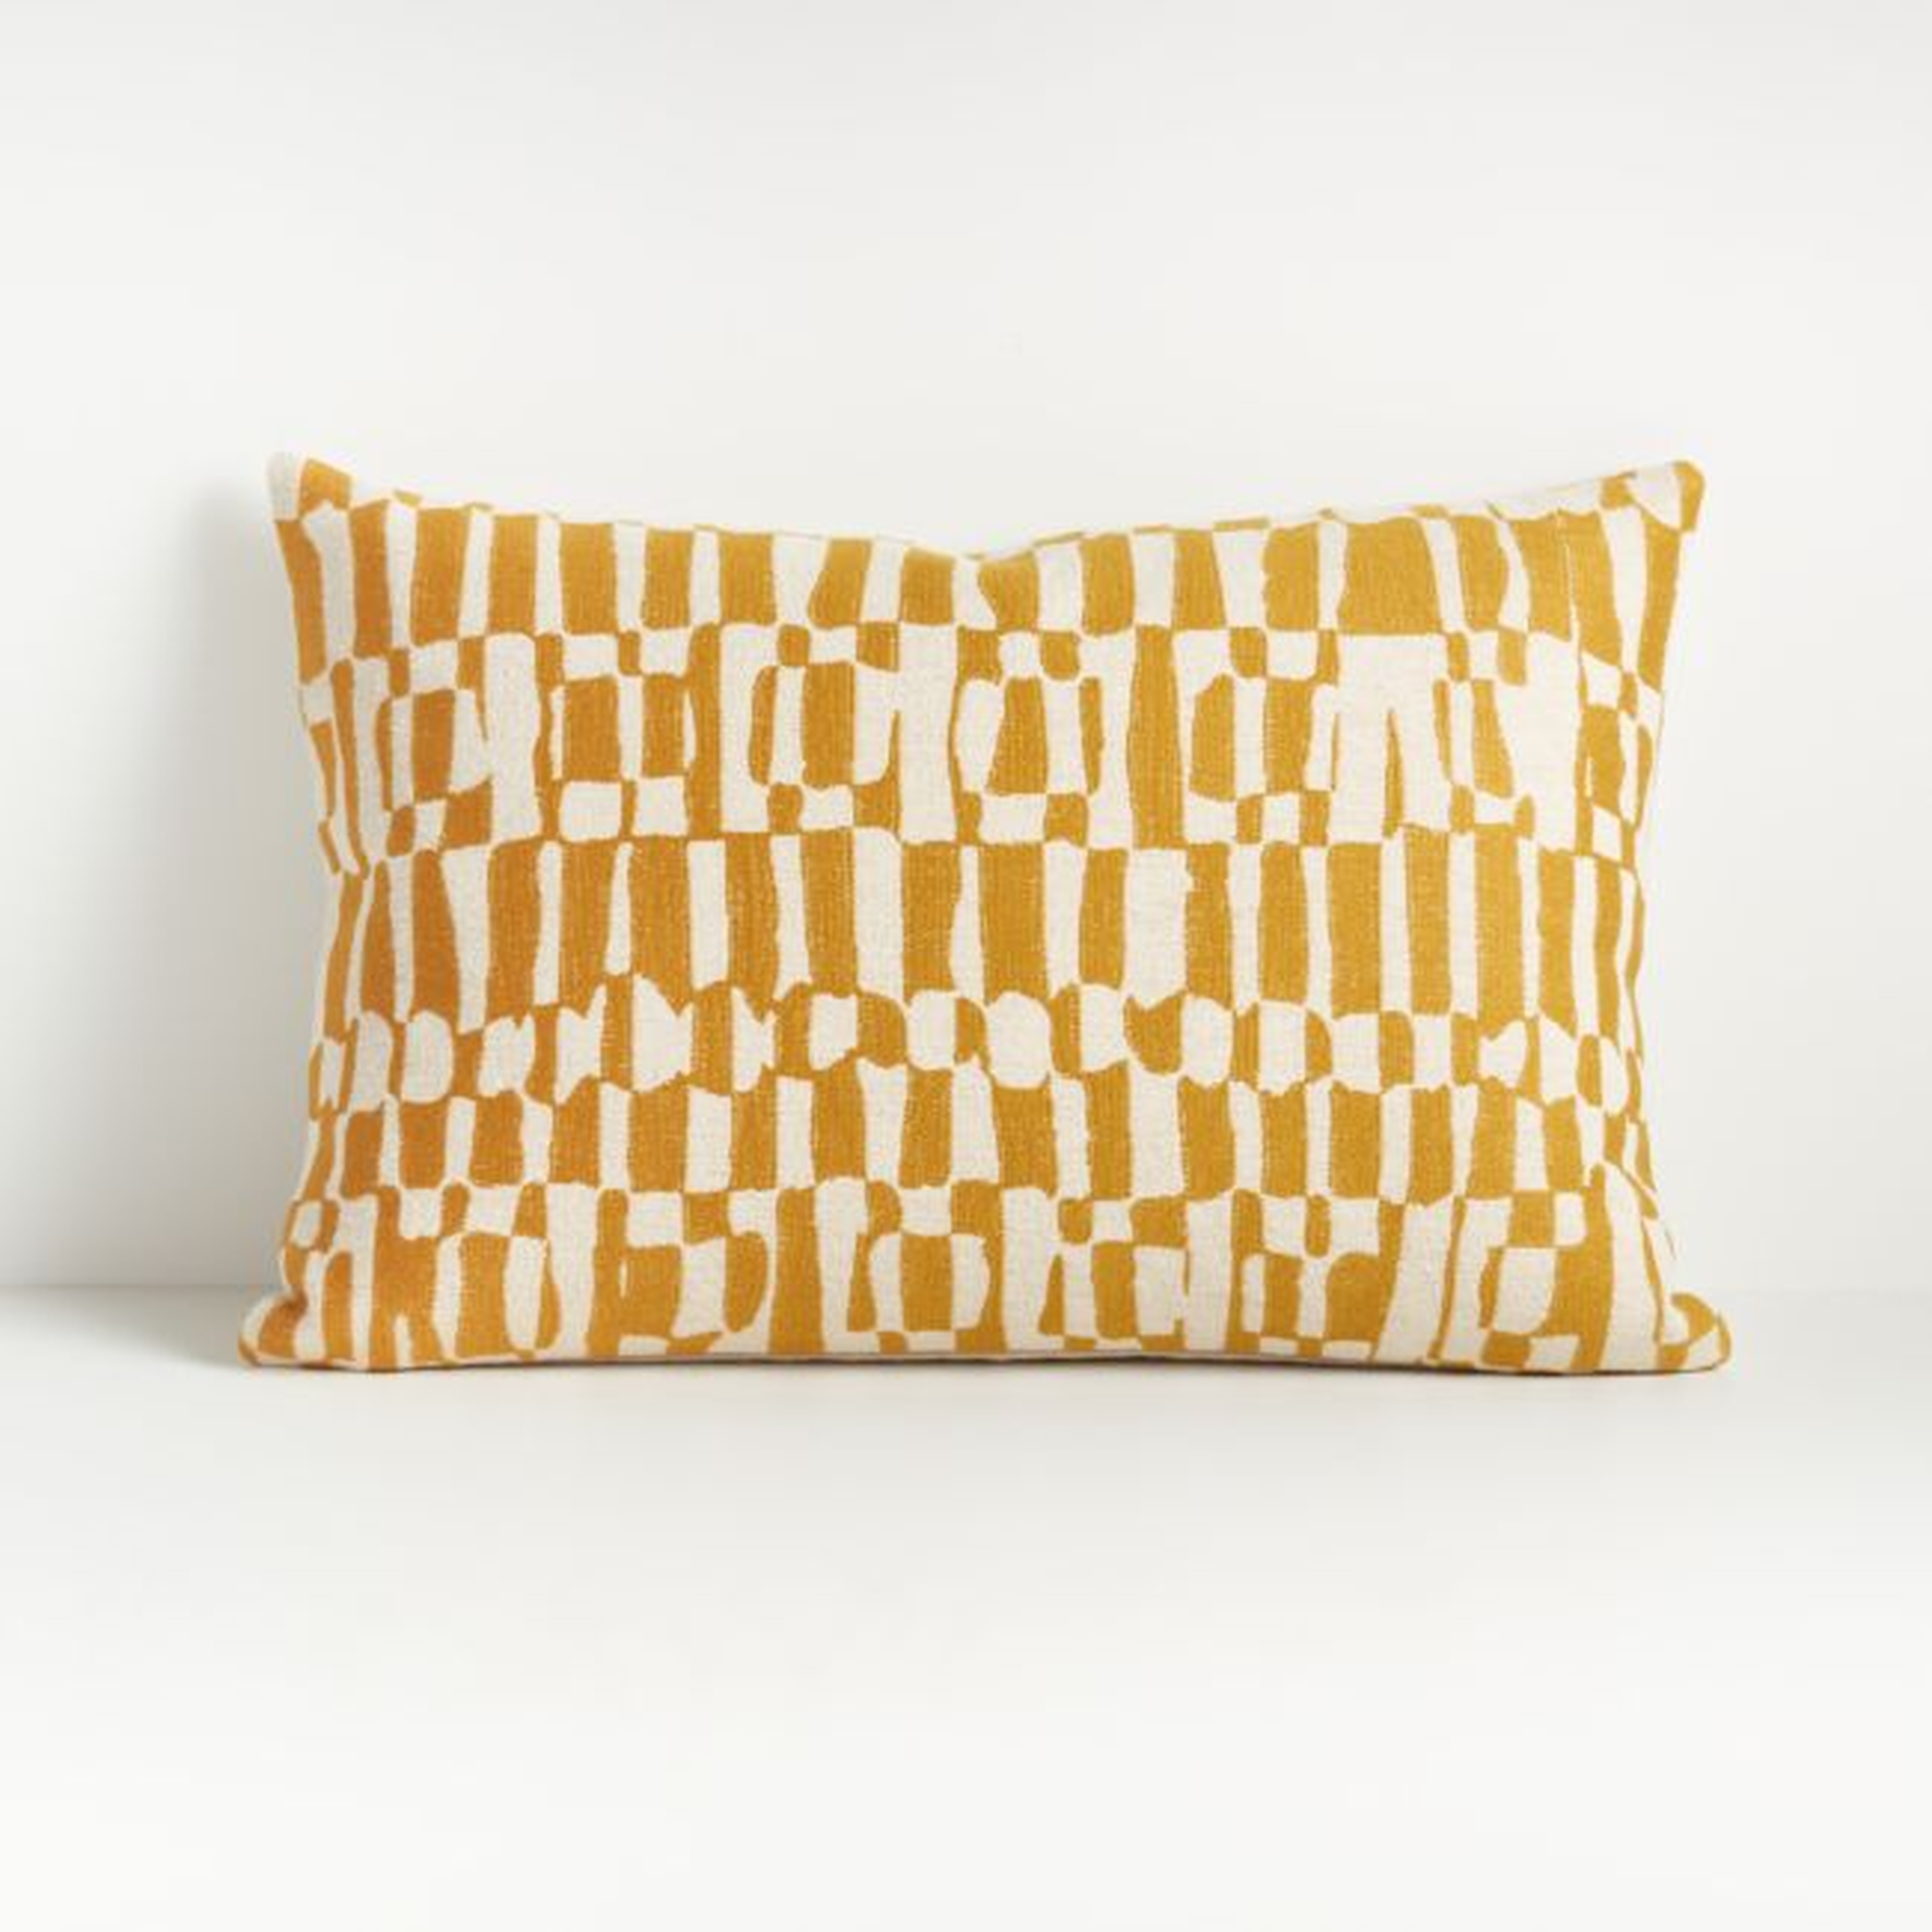 Lyra Yellow and White Pillow 22"x15" - Crate and Barrel